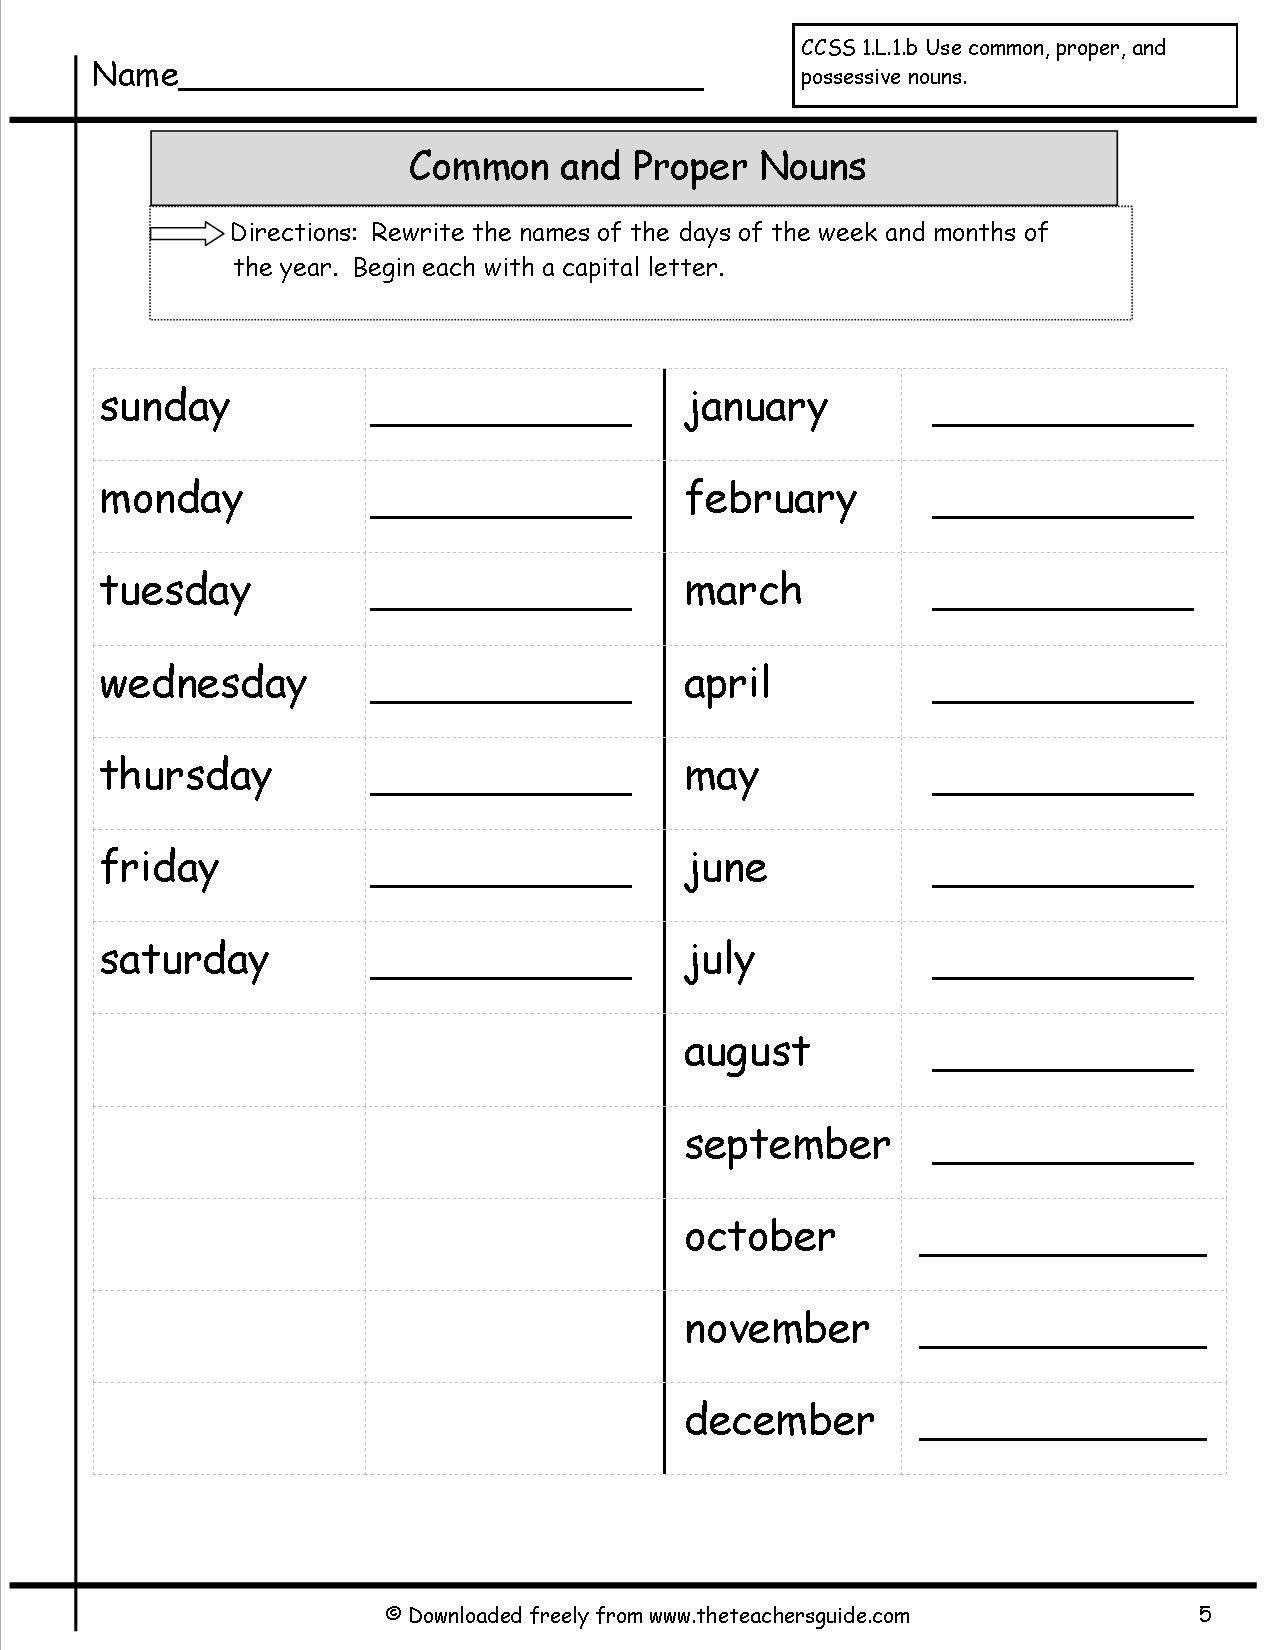 Common And Proper Nouns Worksheets From The Teacher s Guide Proper